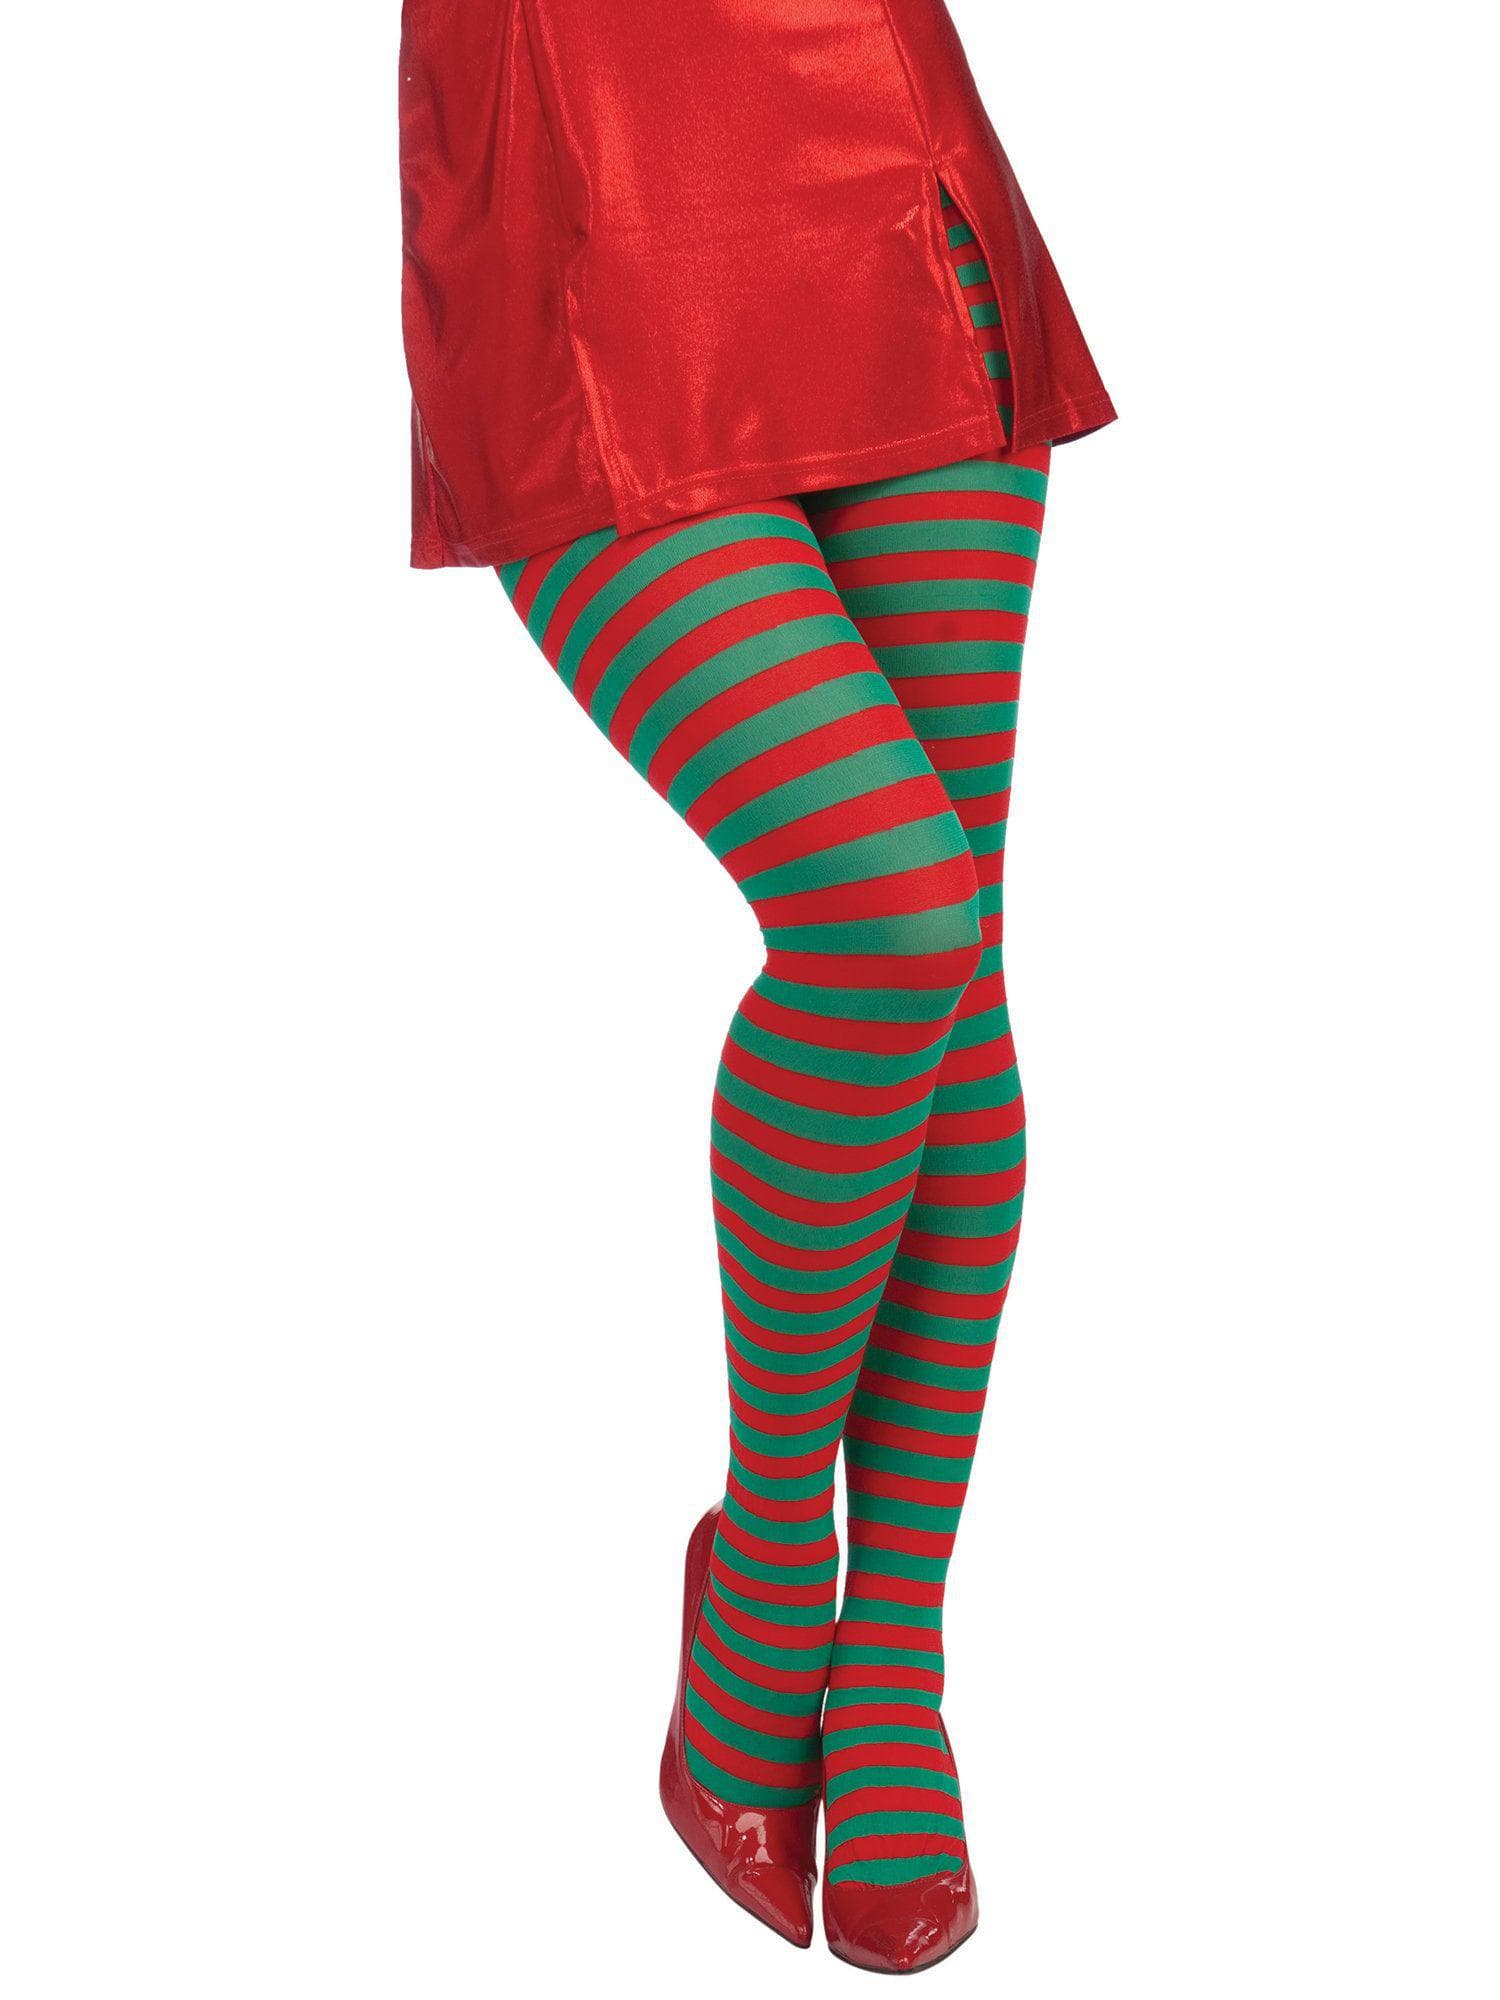 Adult Red and Green Holiday Striped Tights - costumes.com